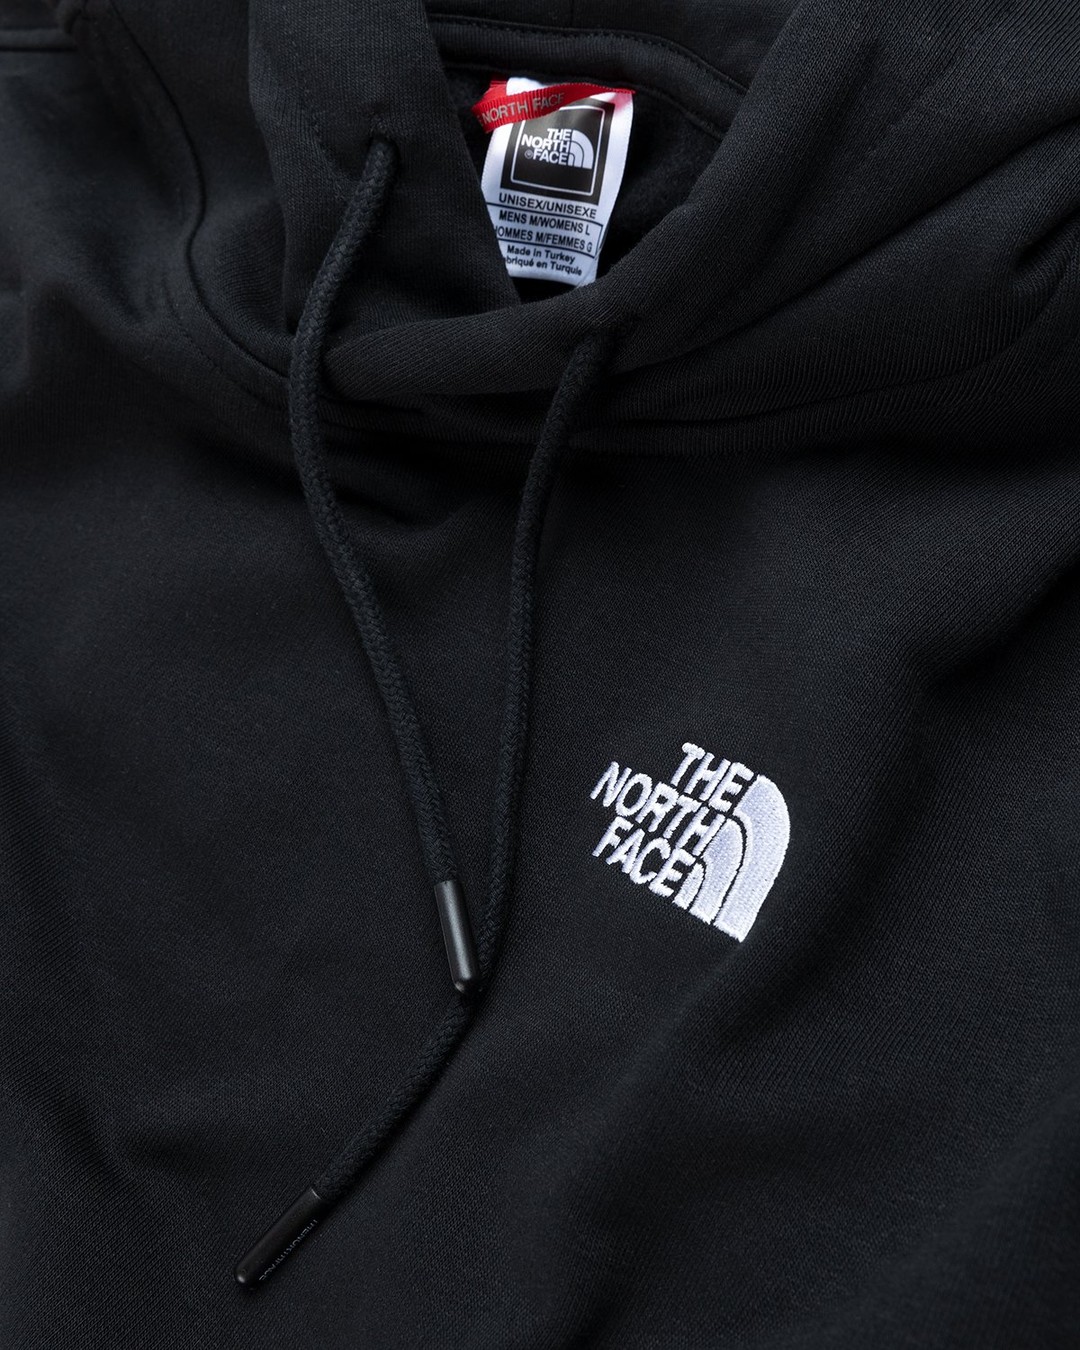 The North Face – Oversized Essential Hoodie Black - Sweats - Black - Image 3